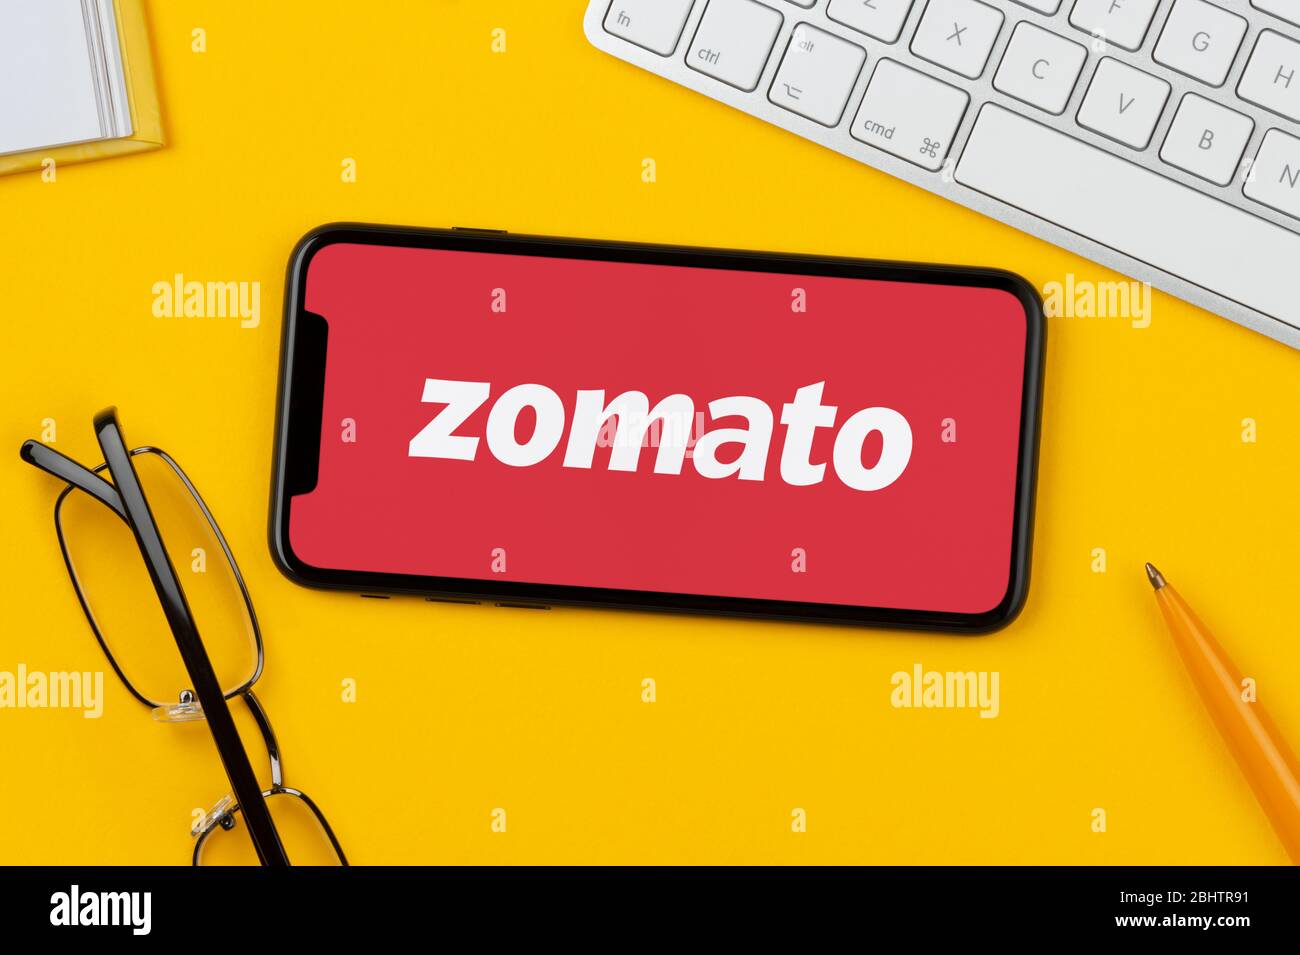 Zomato, Swiggy Outrage Flooded Twitter With Memes And Reactions | Newsmobile